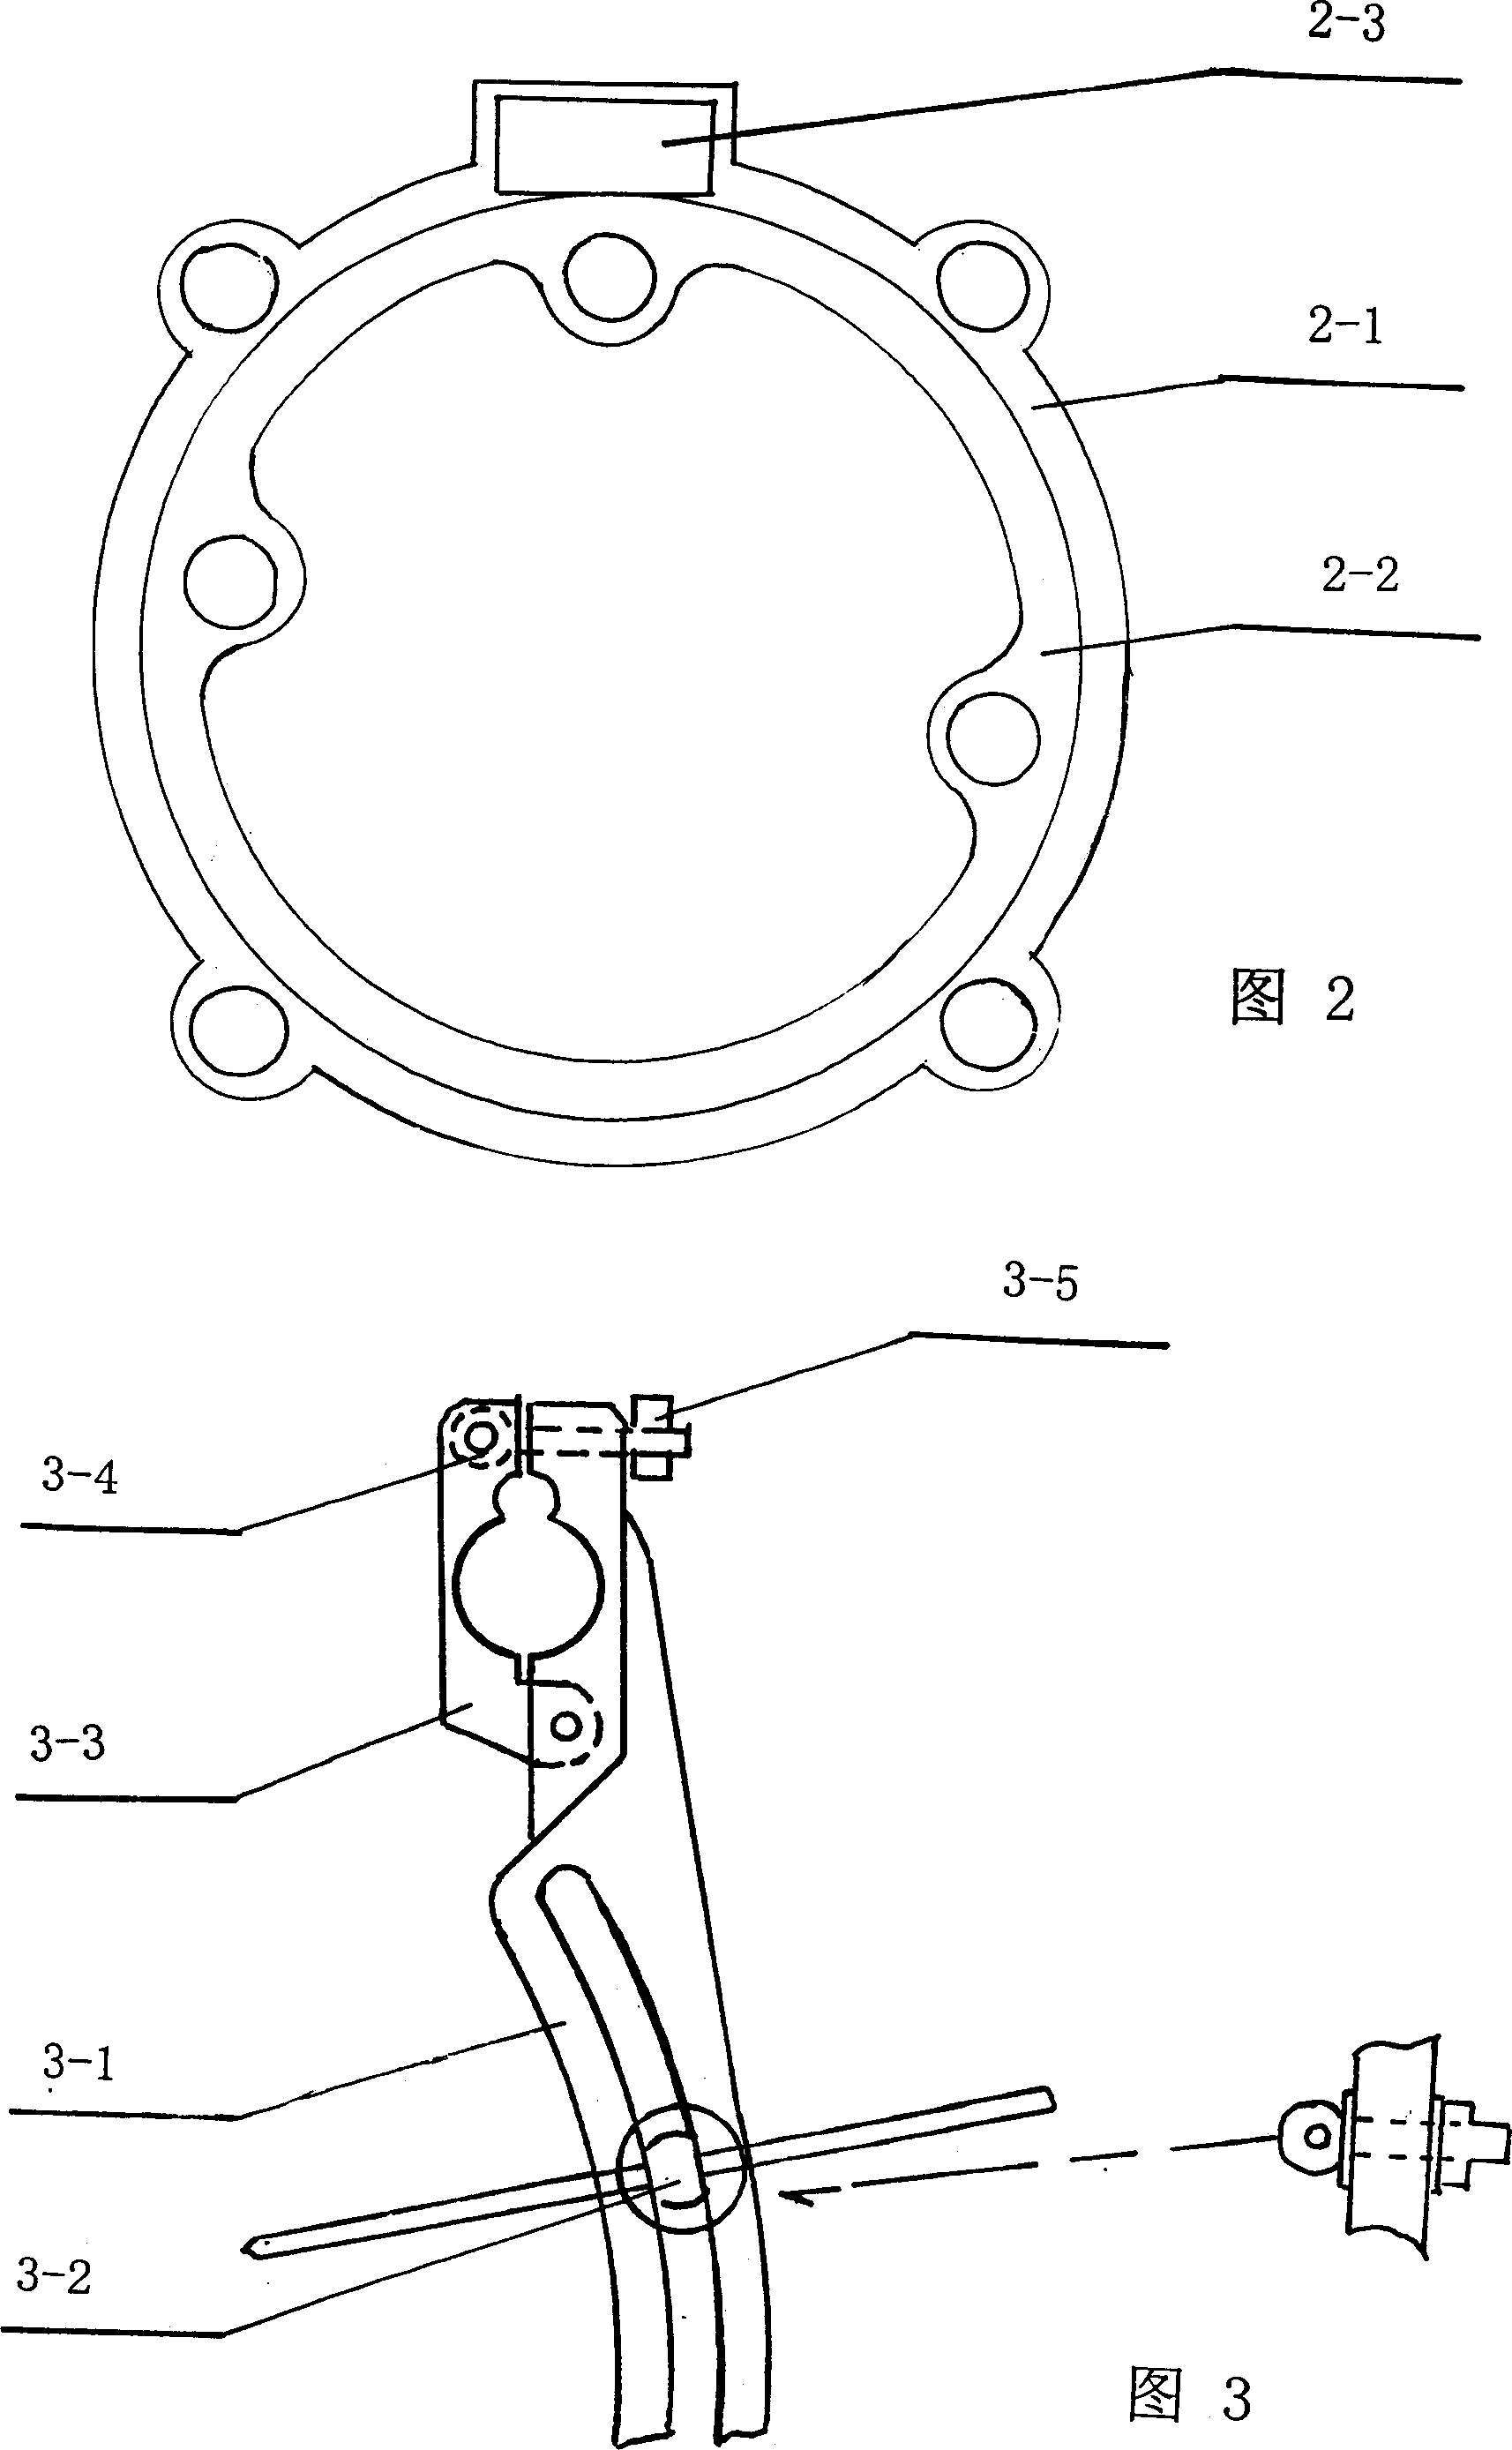 Computer-controlled fracture shaping, repairing and outer fixing system